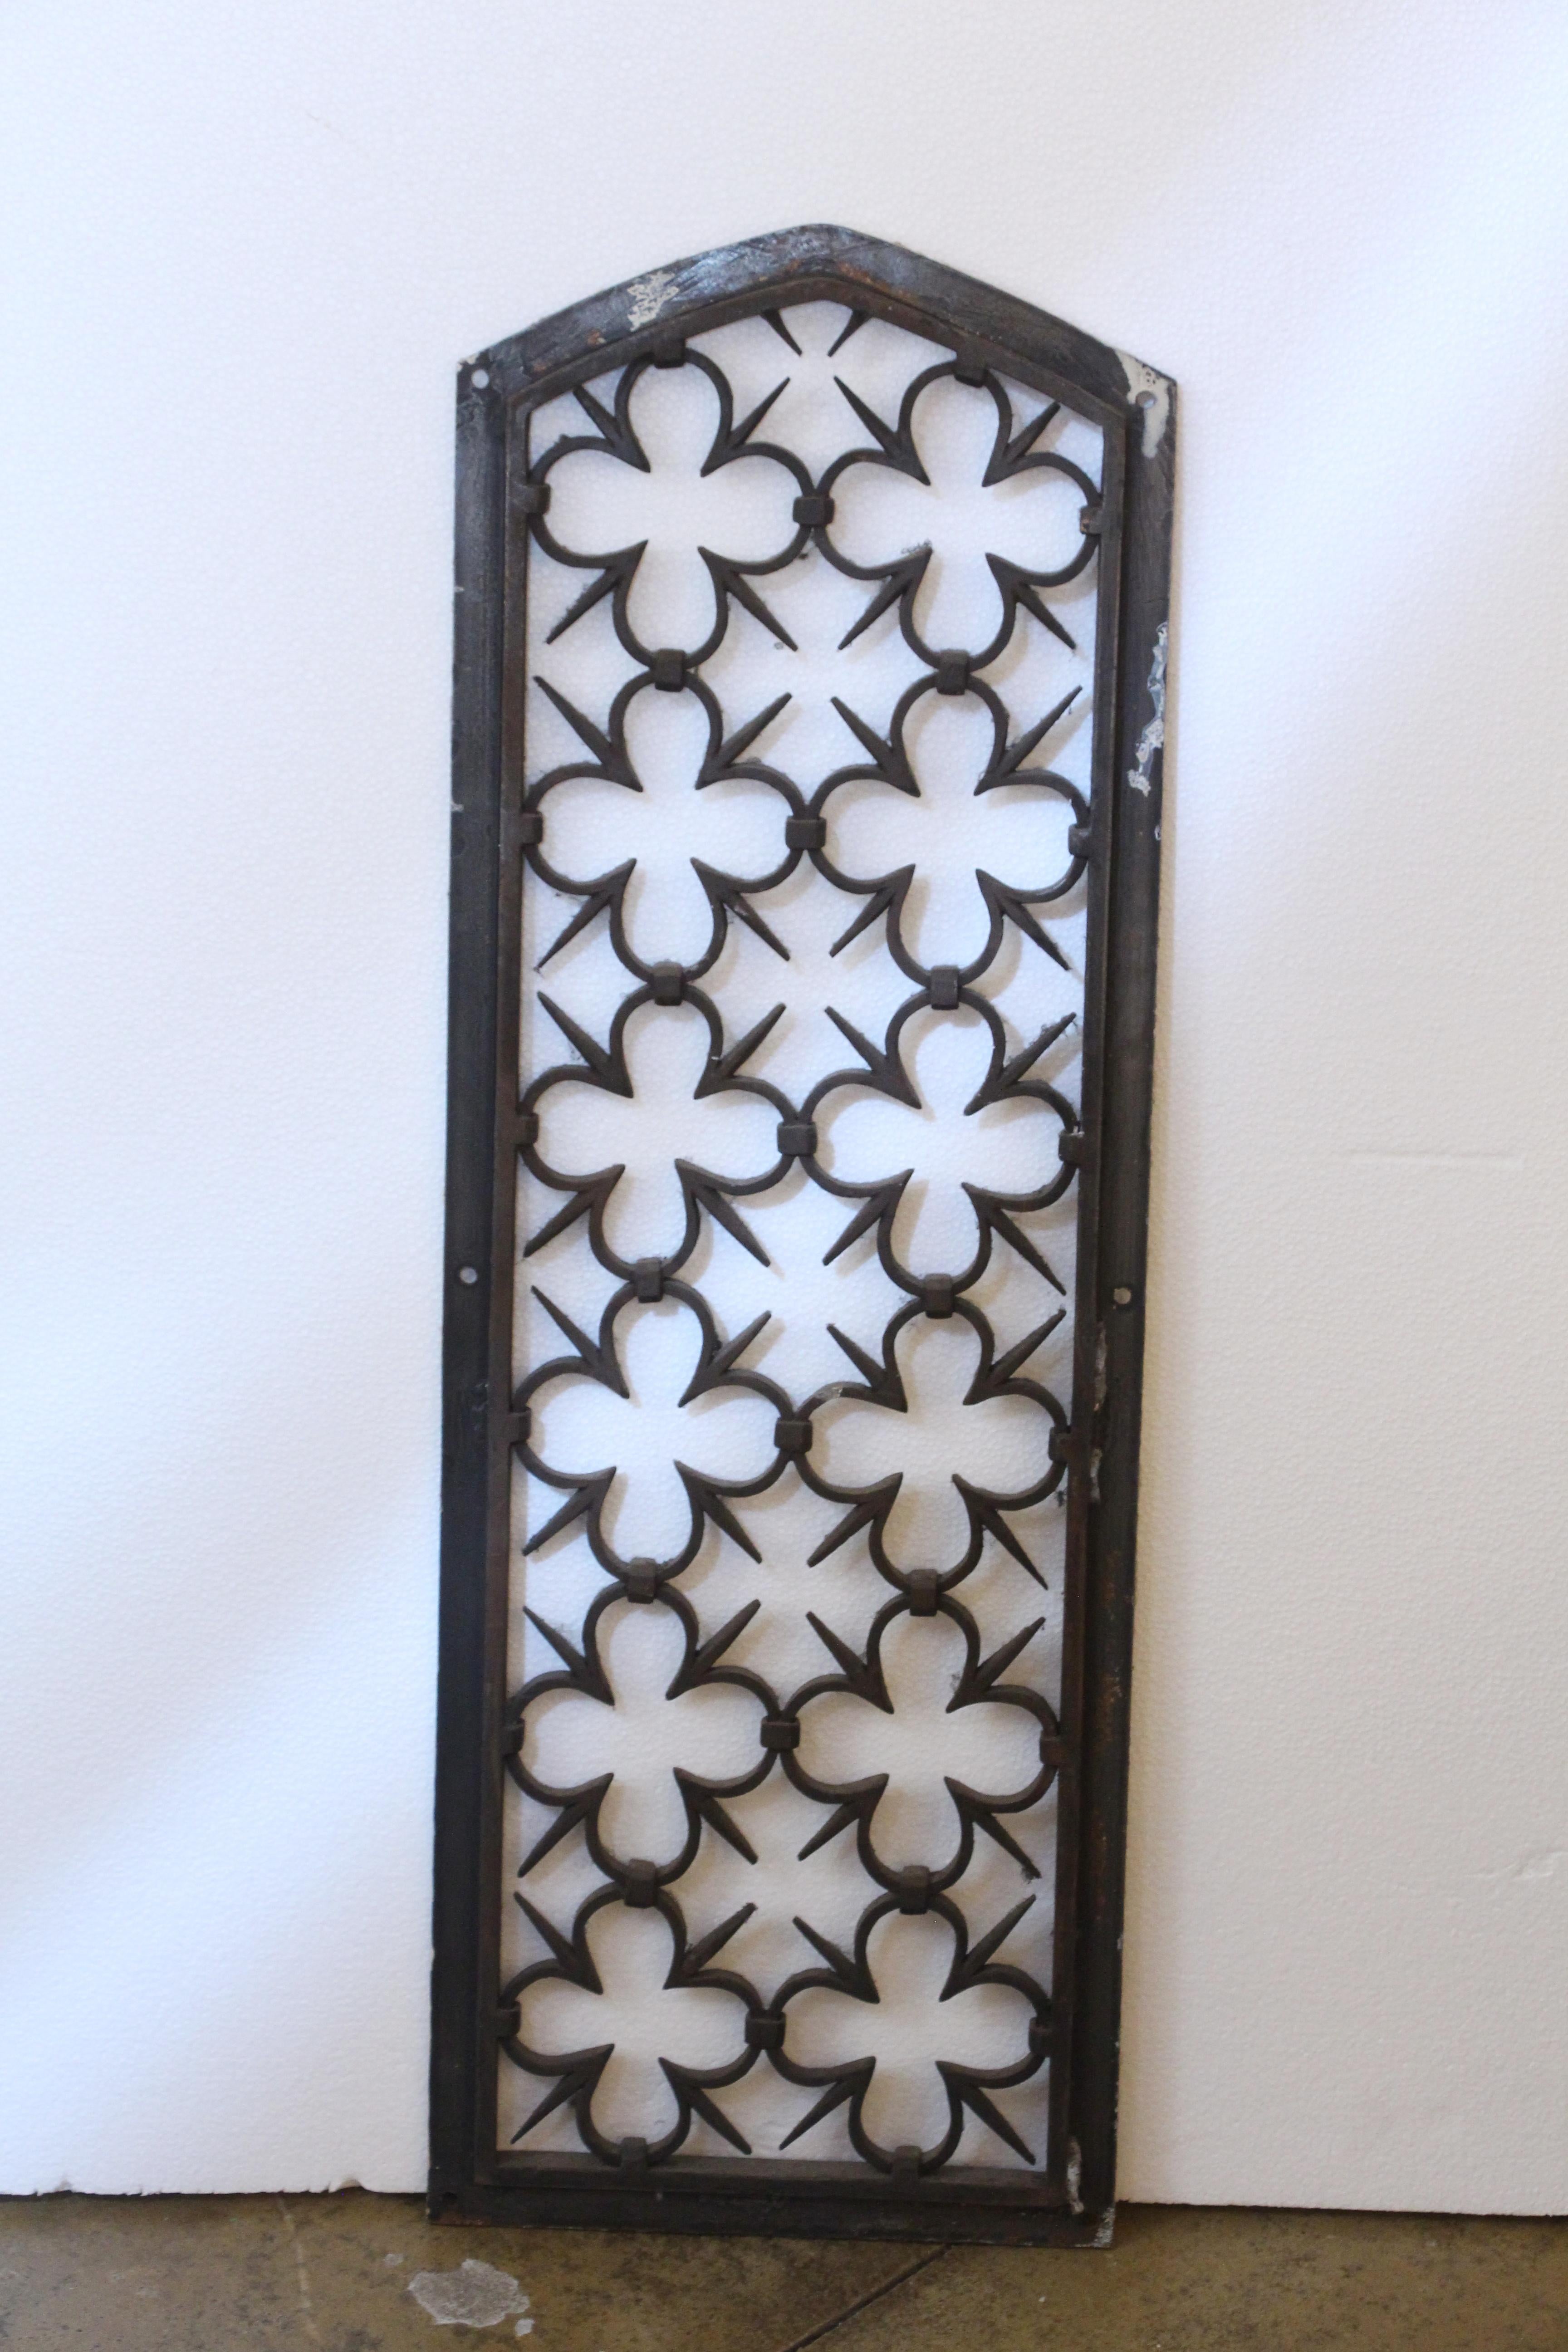 American 1890s Wrought Iron Arched Gothic Window Guard